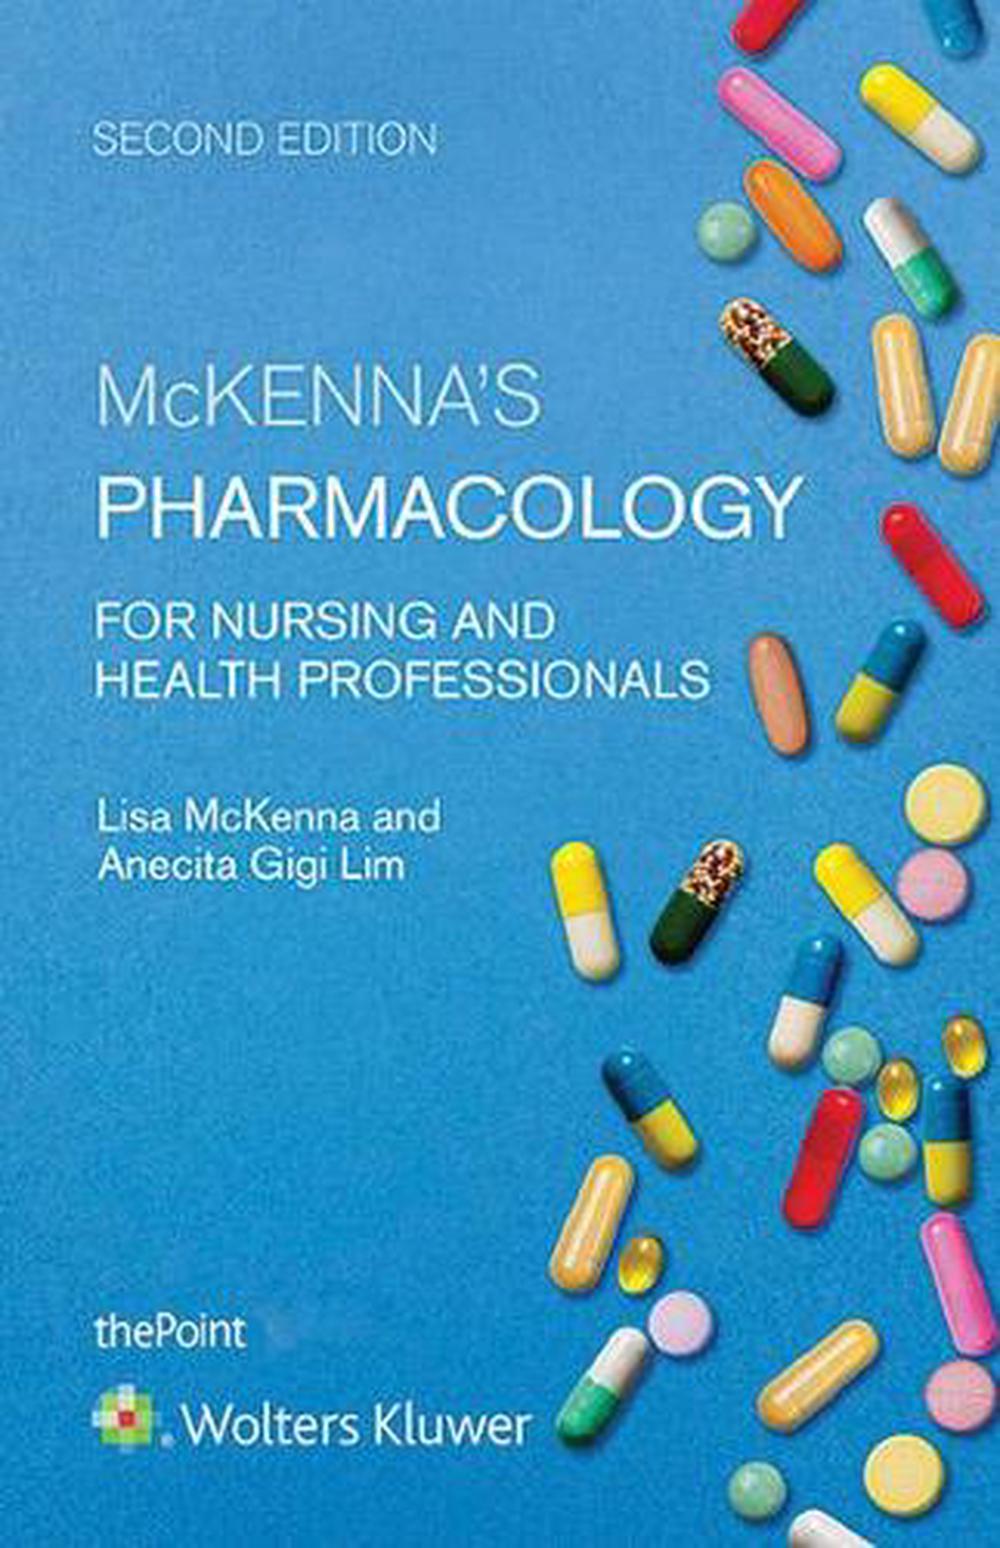 Mckennas Pharmacology For Nursing And Health Professionals - 